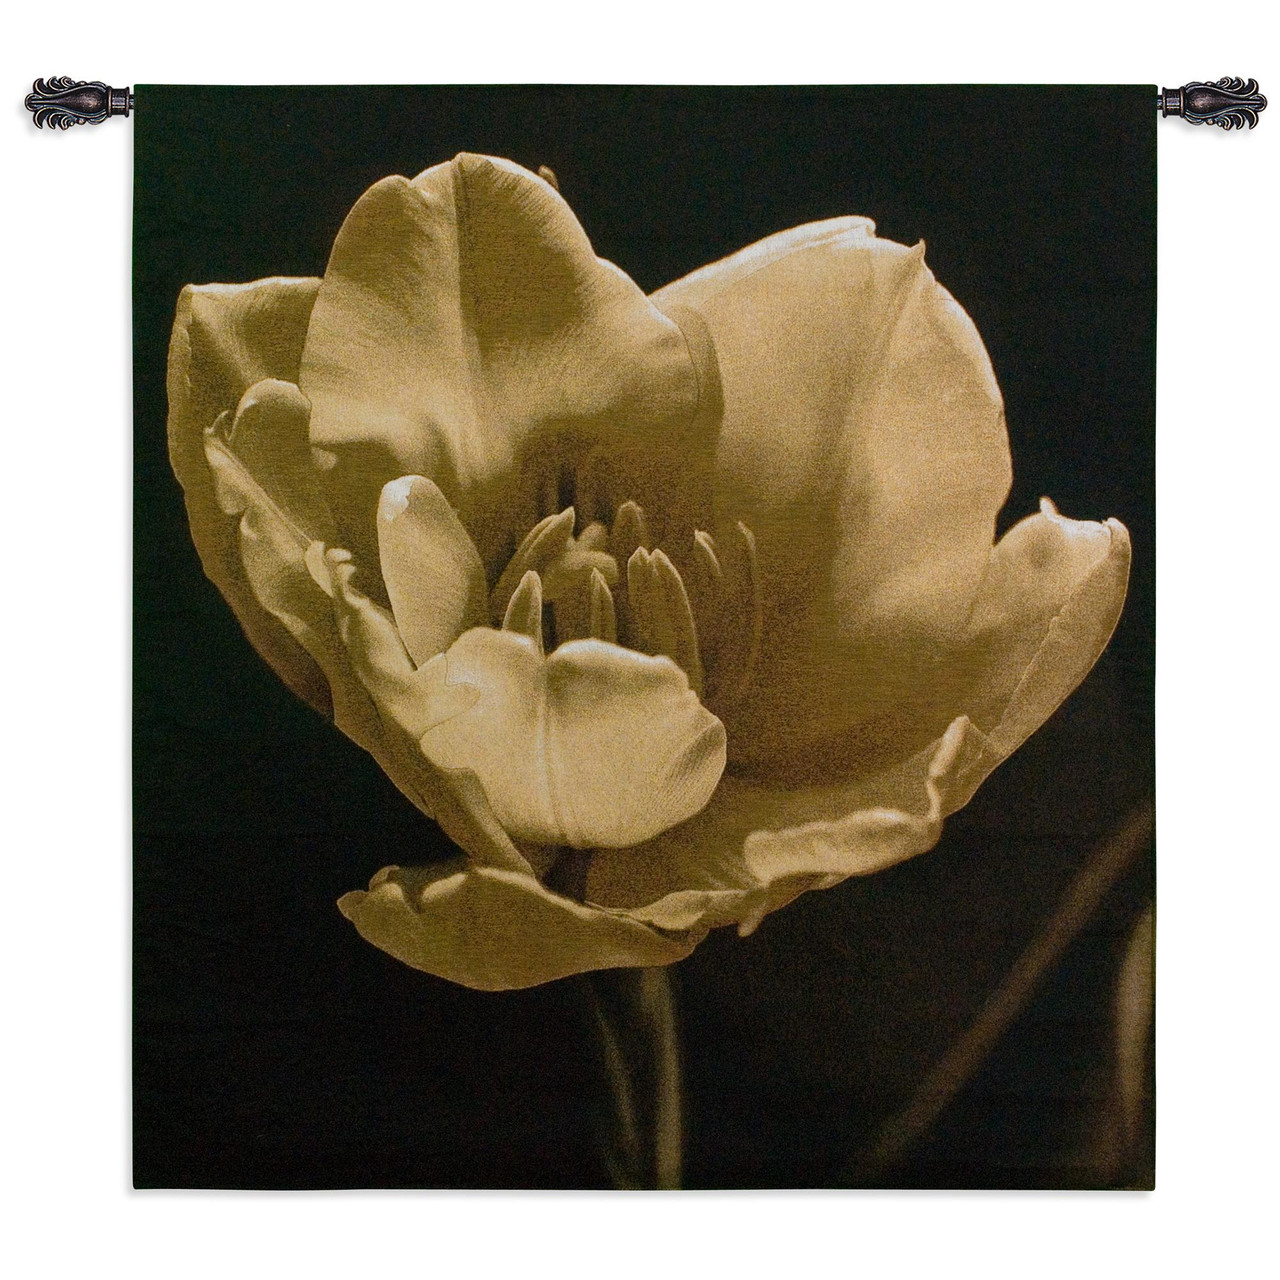 Timeless Grace IV by Charles Britt Woven Tapestry Wall Art Hanging  Photorealistic White Magnolia Photograph on Black 100% Cotton USA Size  53x45